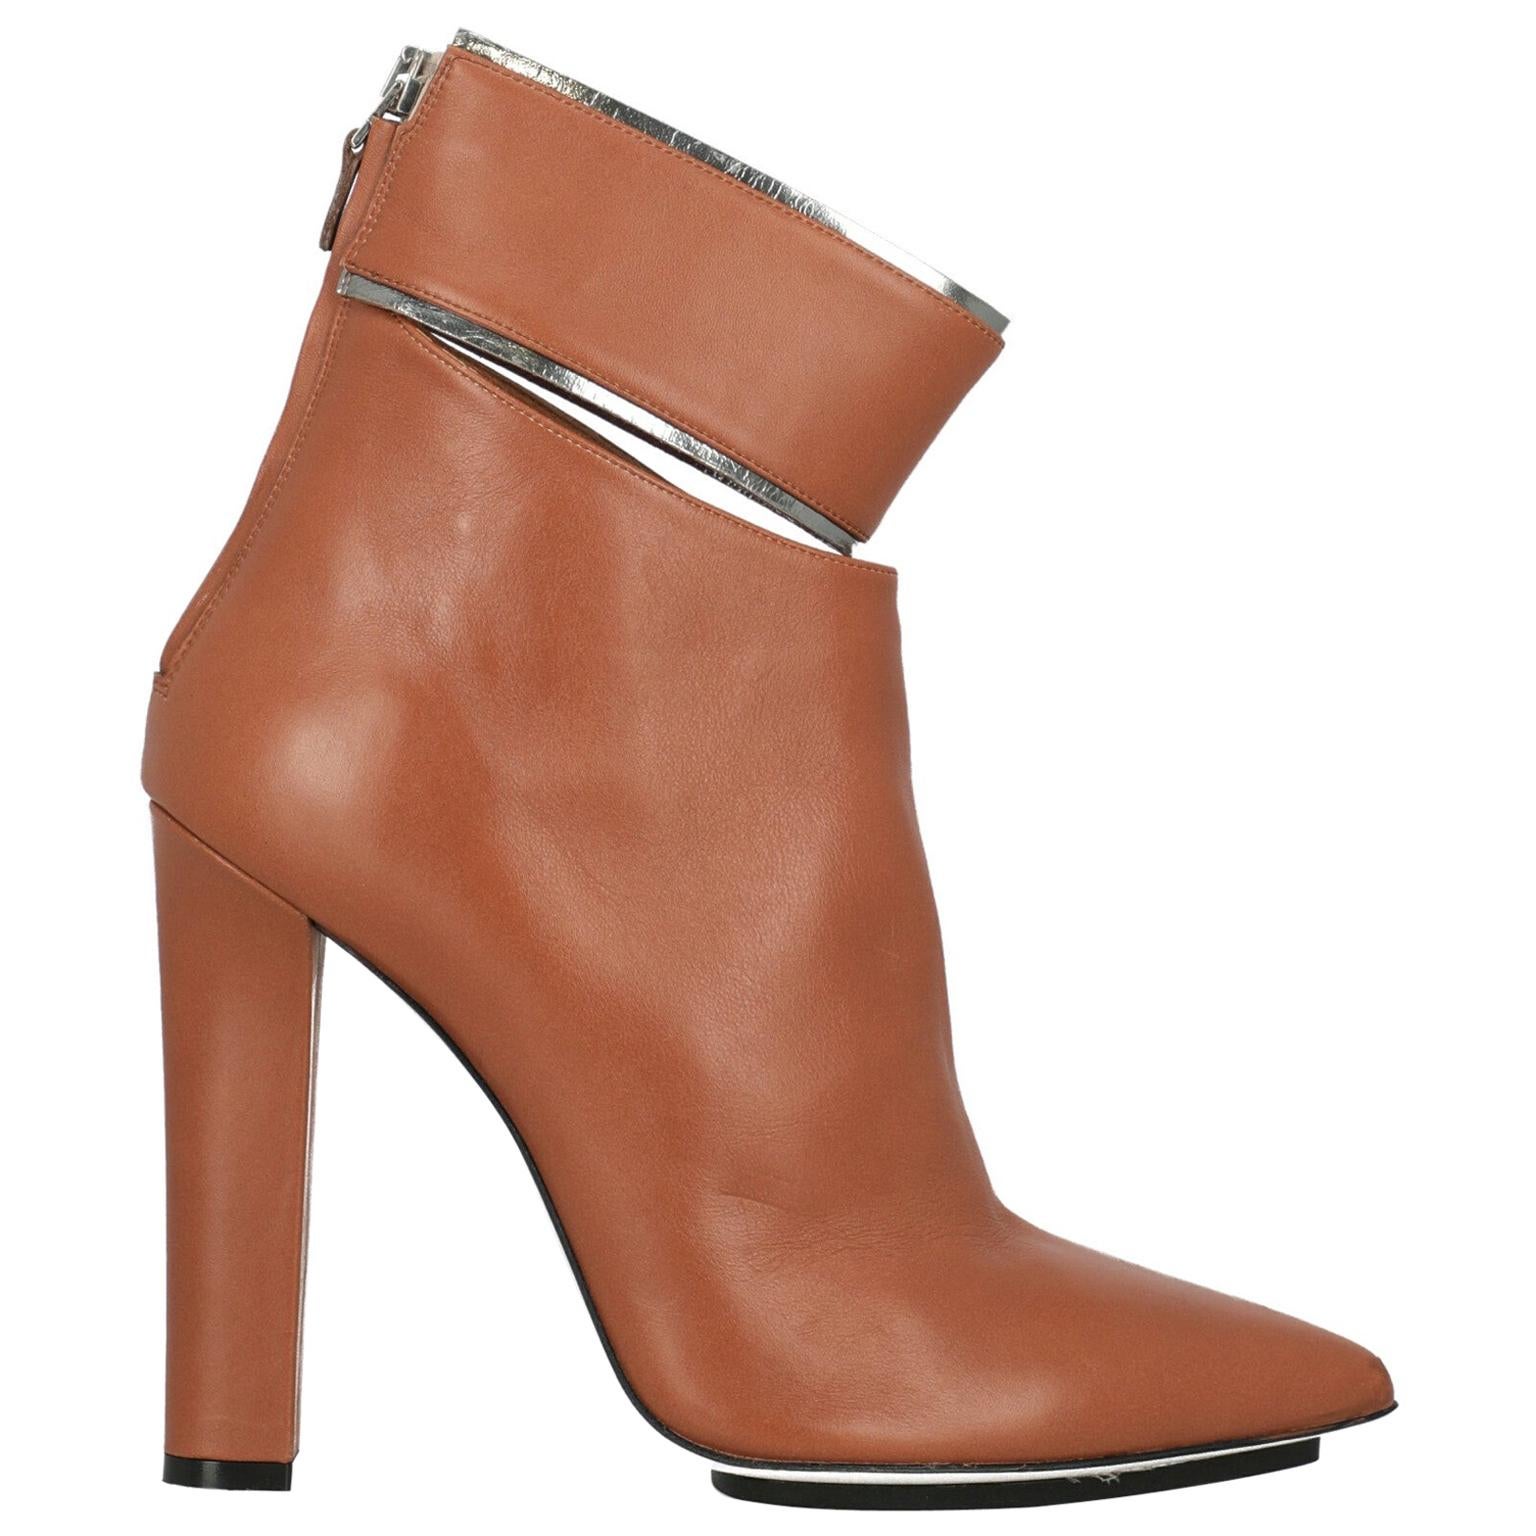 Gianfranco Ferre Woman Ankle boots Camel Color Leather IT 40 For Sale